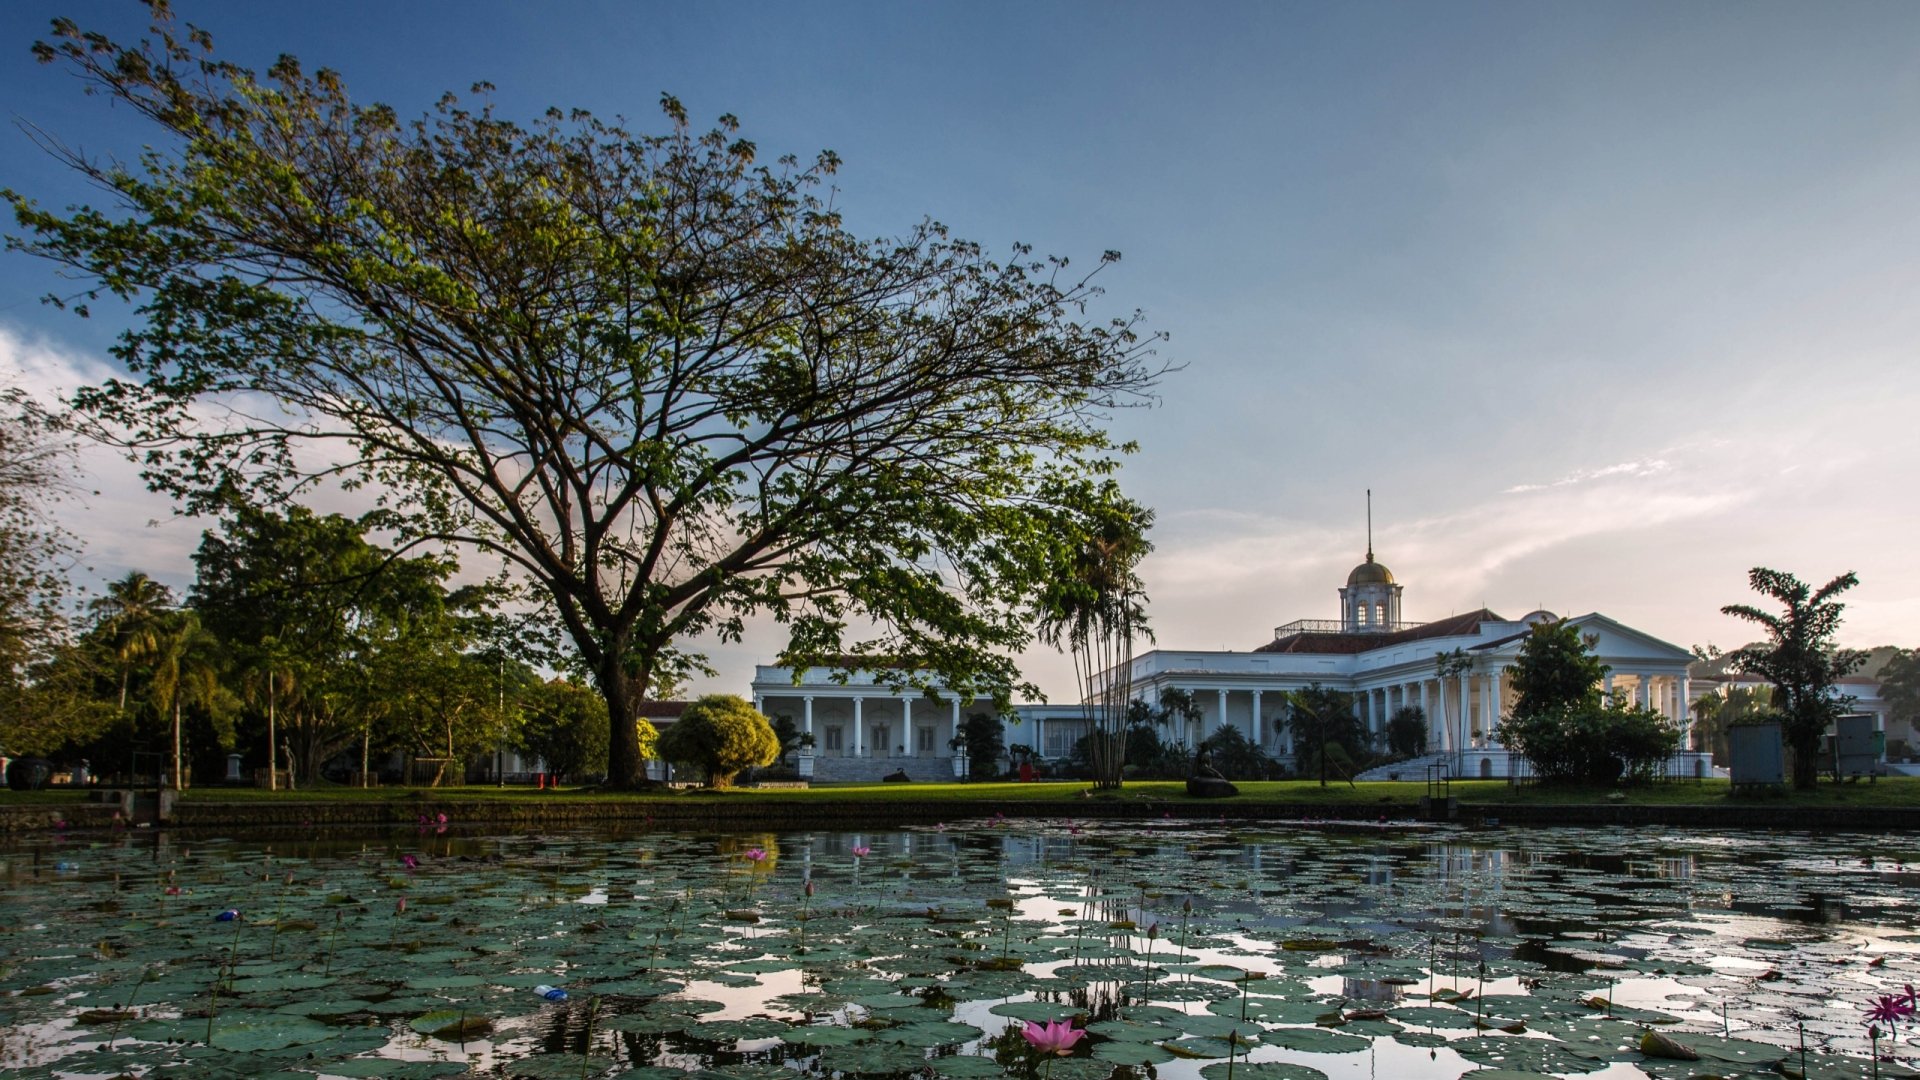 Bogor Palace Full HD Wallpaper and Background Image 2560x1440 ID 562552